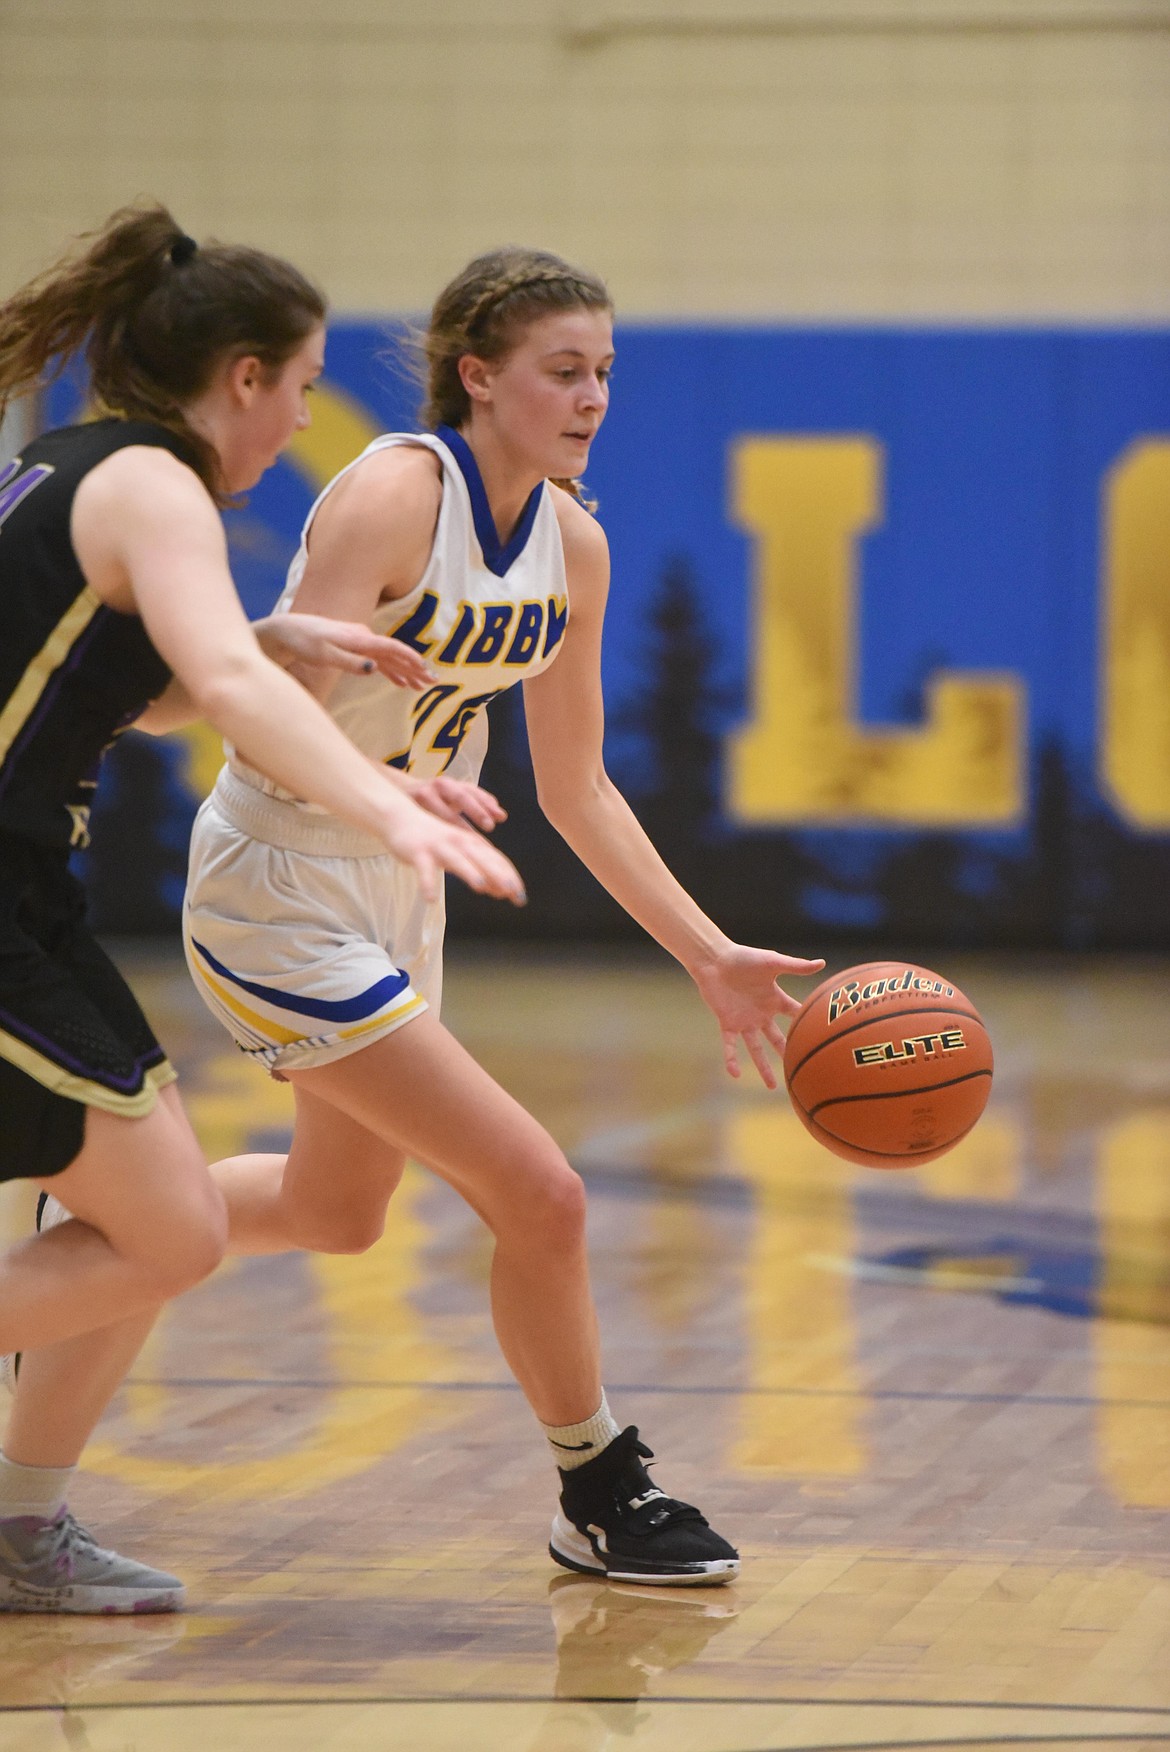 Libby senior Elise Erickson drives the ball during the Lady Loggers Feb. 2 game against Polson. (Will Langhorne/The Western News)